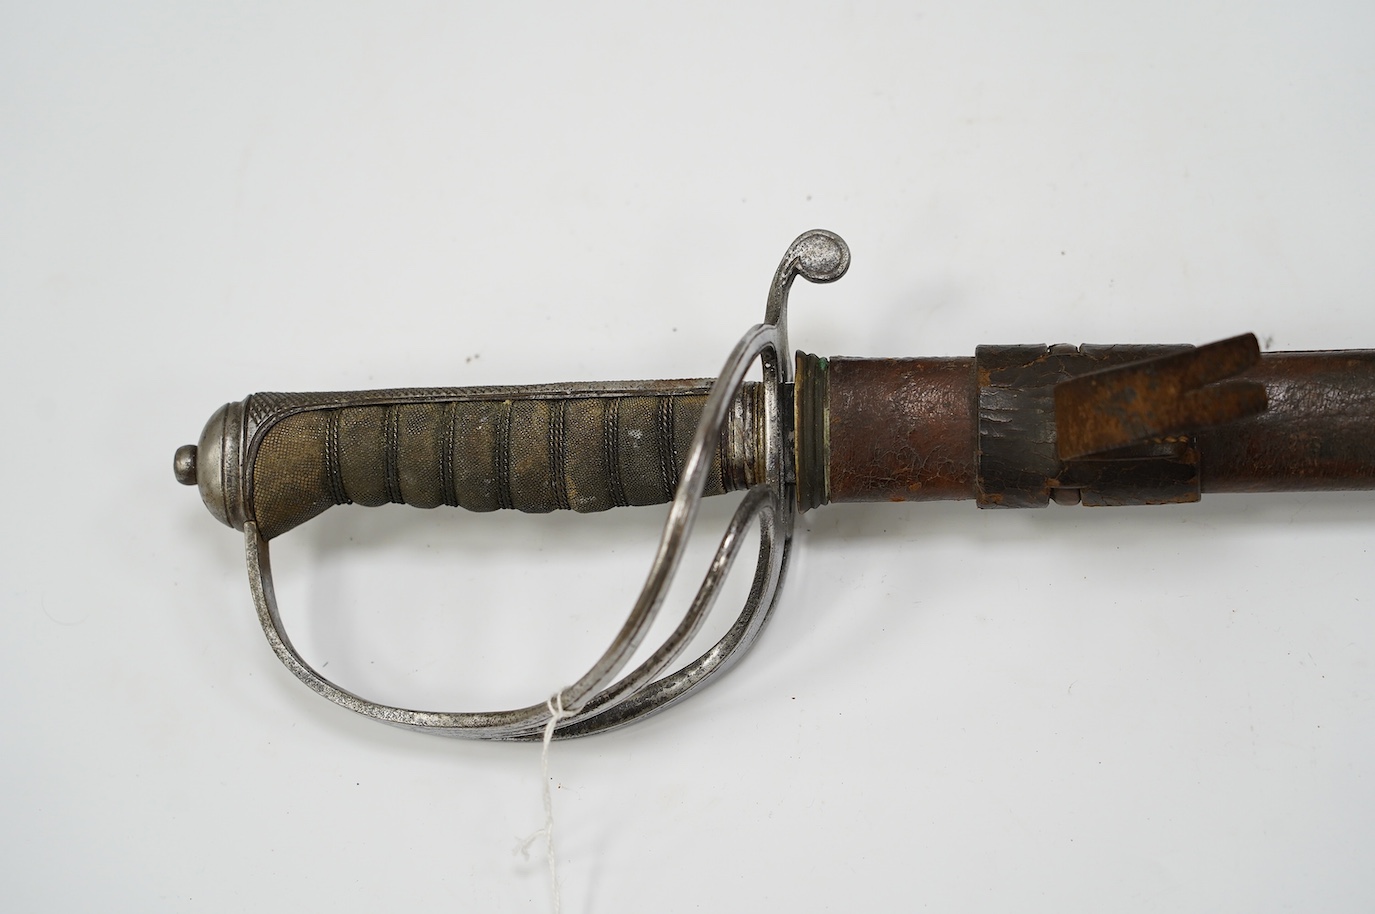 A George V Royal Artillery sword, regulation blade and hilt, in its leather scabbard, blade 90cm. Condition - poor, heavily pitted